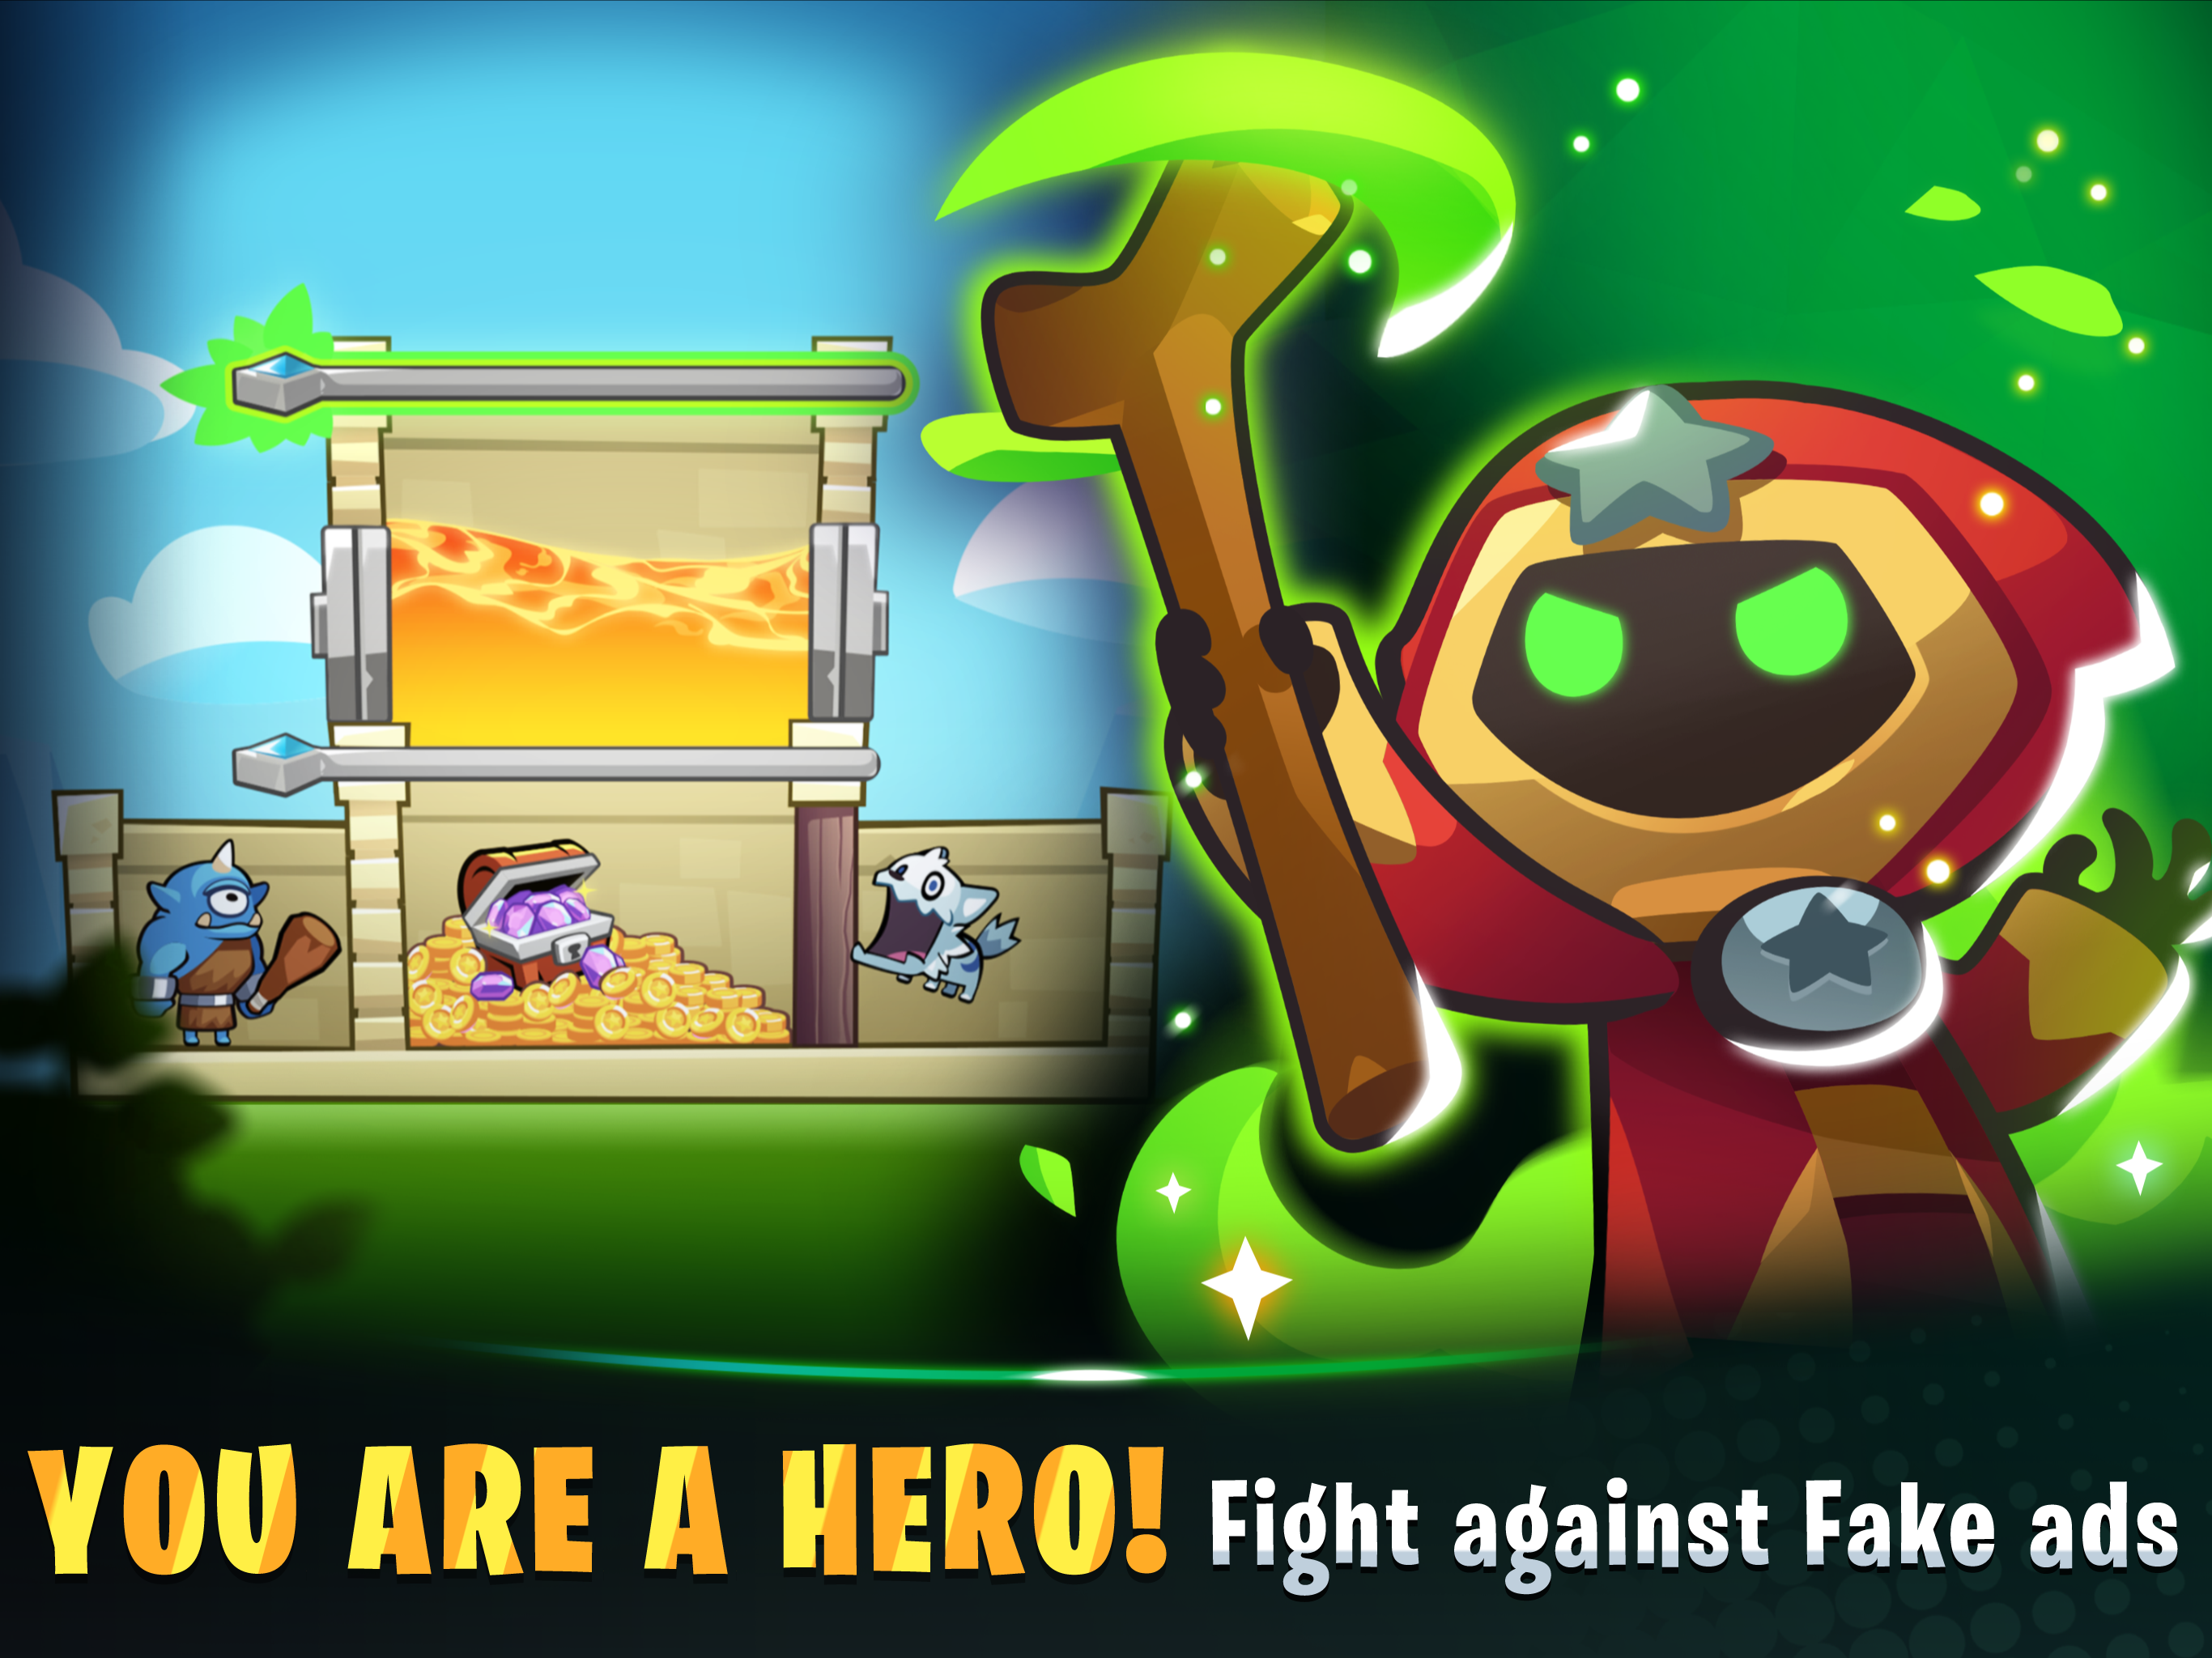 Idle War: Legendary Heroes - Download & Play for Free Here